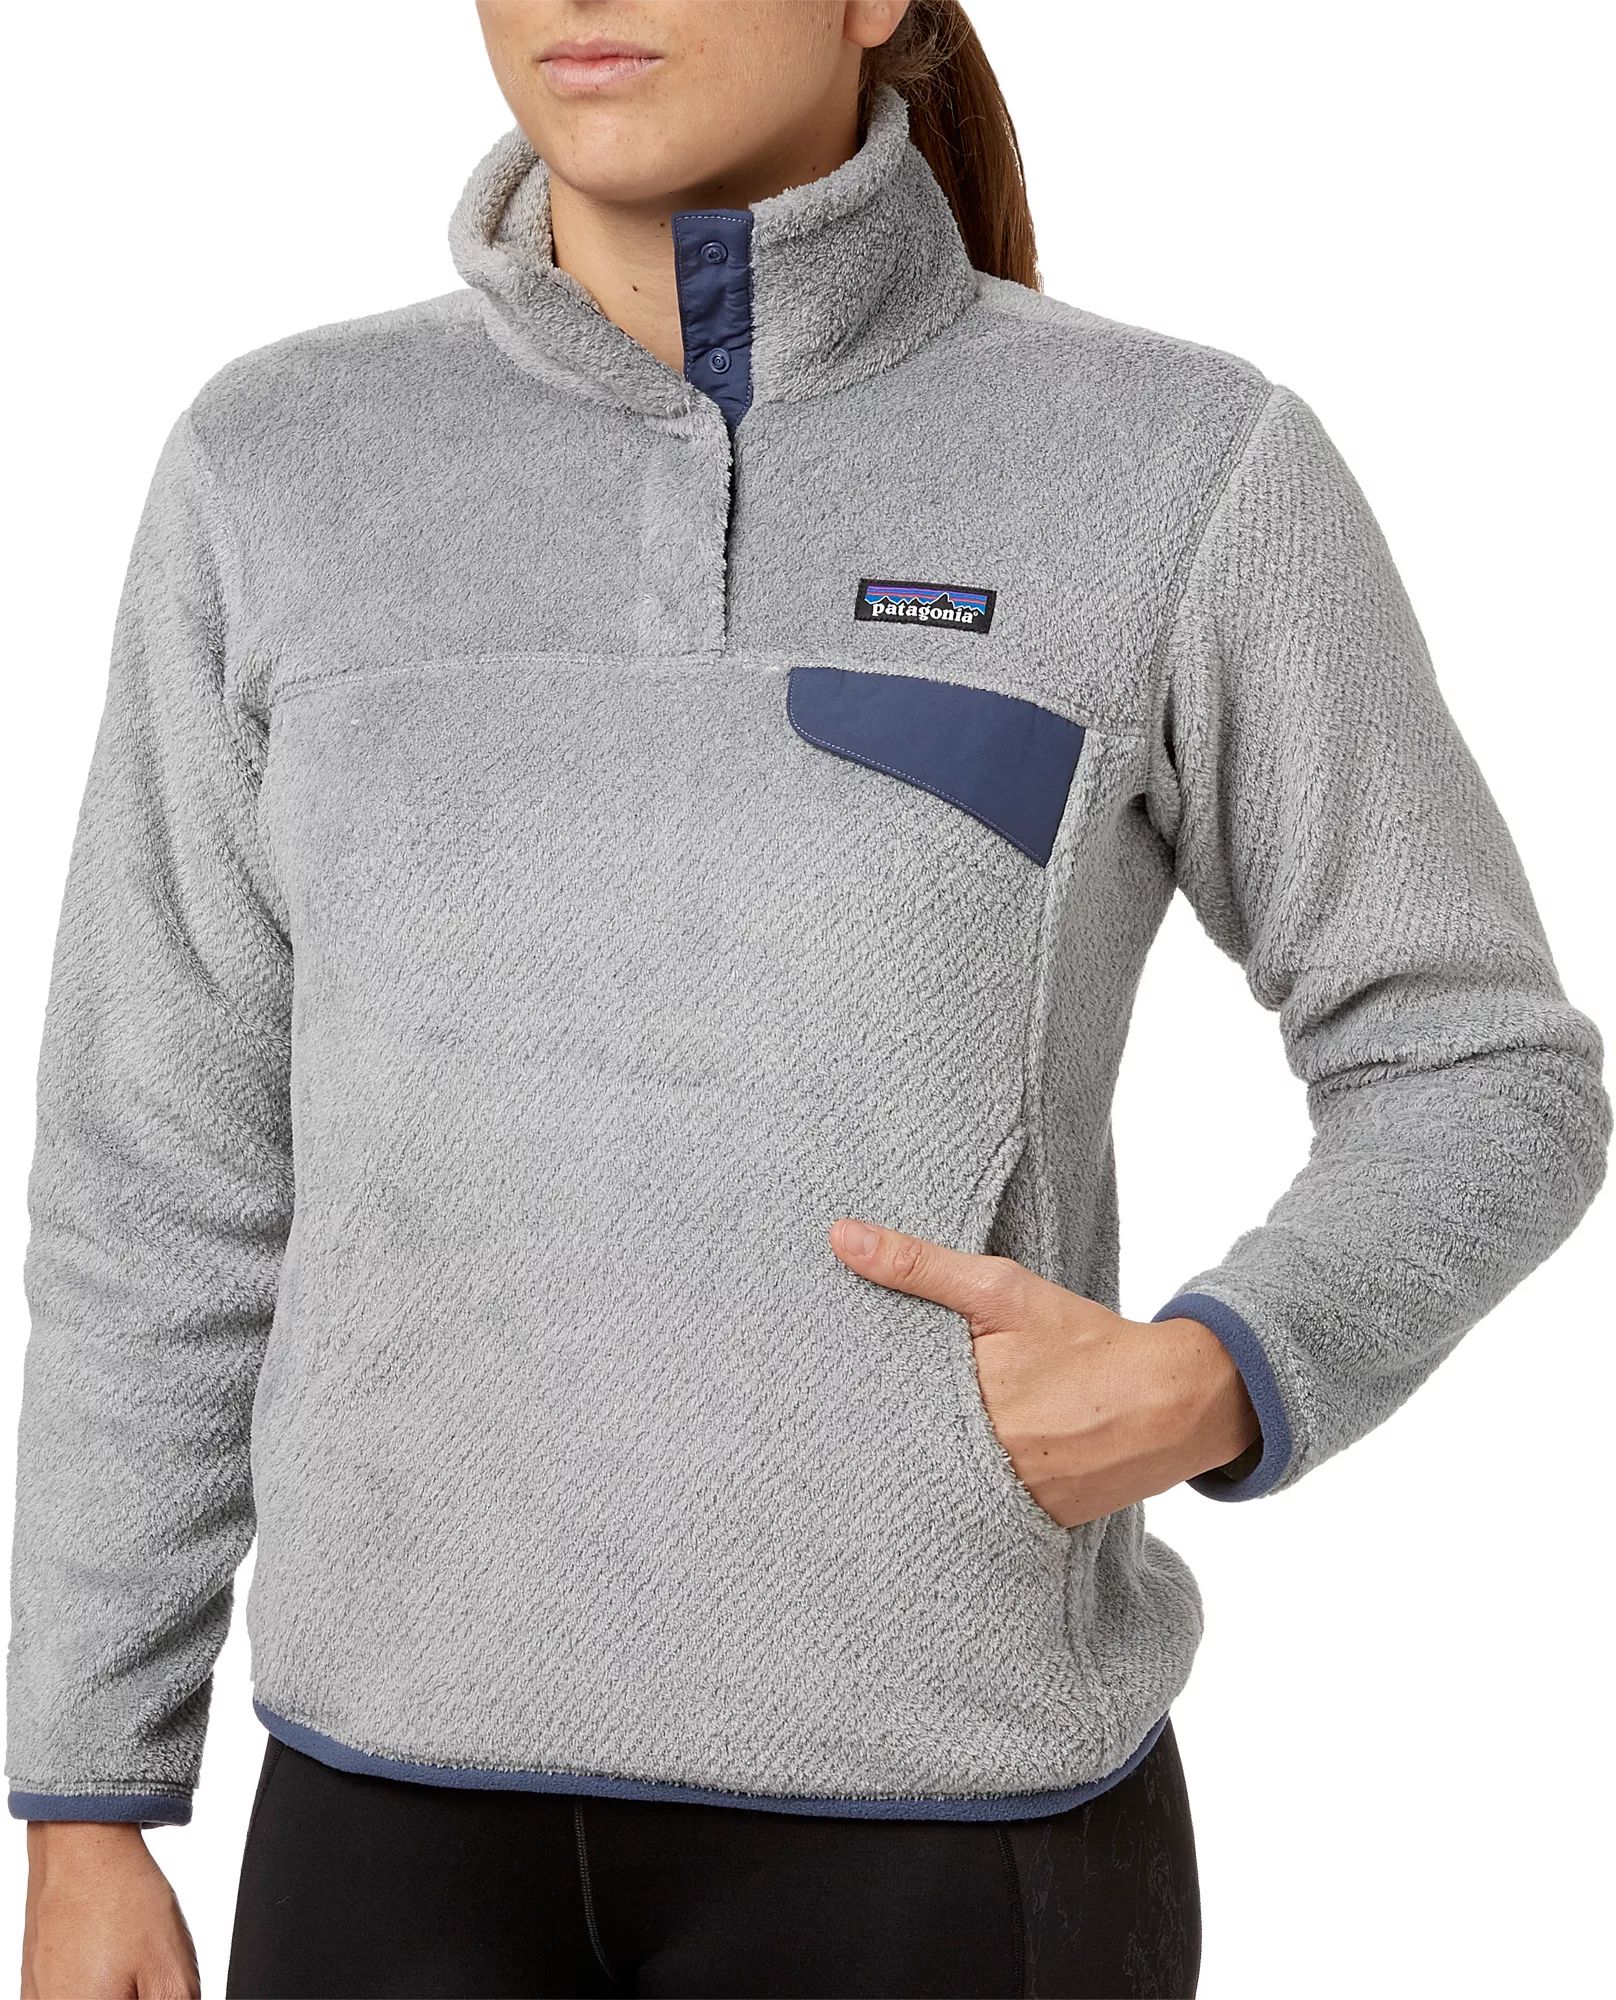 Patagonia Women's Re-Tool Snap-T Fleece Pullover, Size: Small, Gray | Dick's Sporting Goods